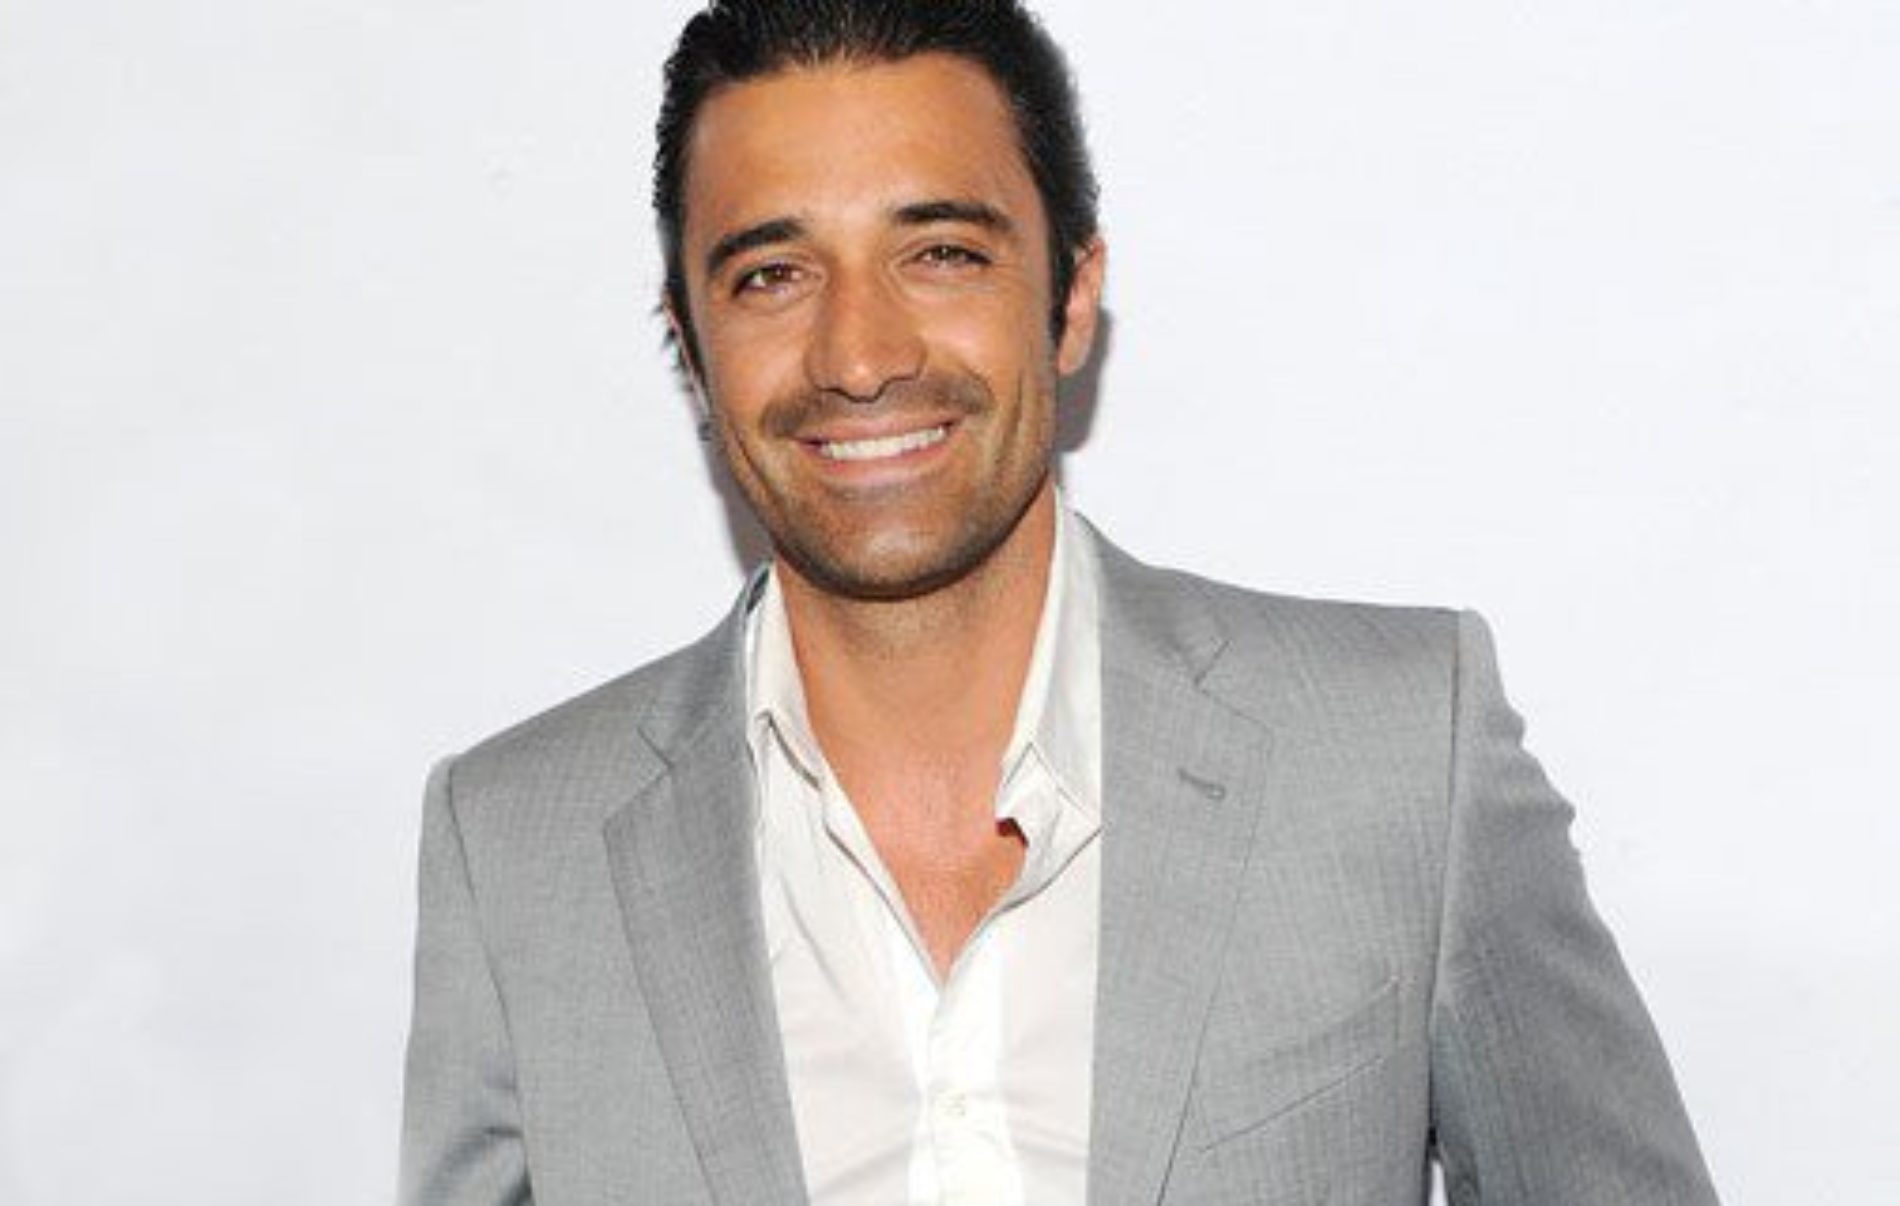 ‘Sex and the City’ star Gilles Marini says he was a ‘piece of meat’ for Hollywood executives